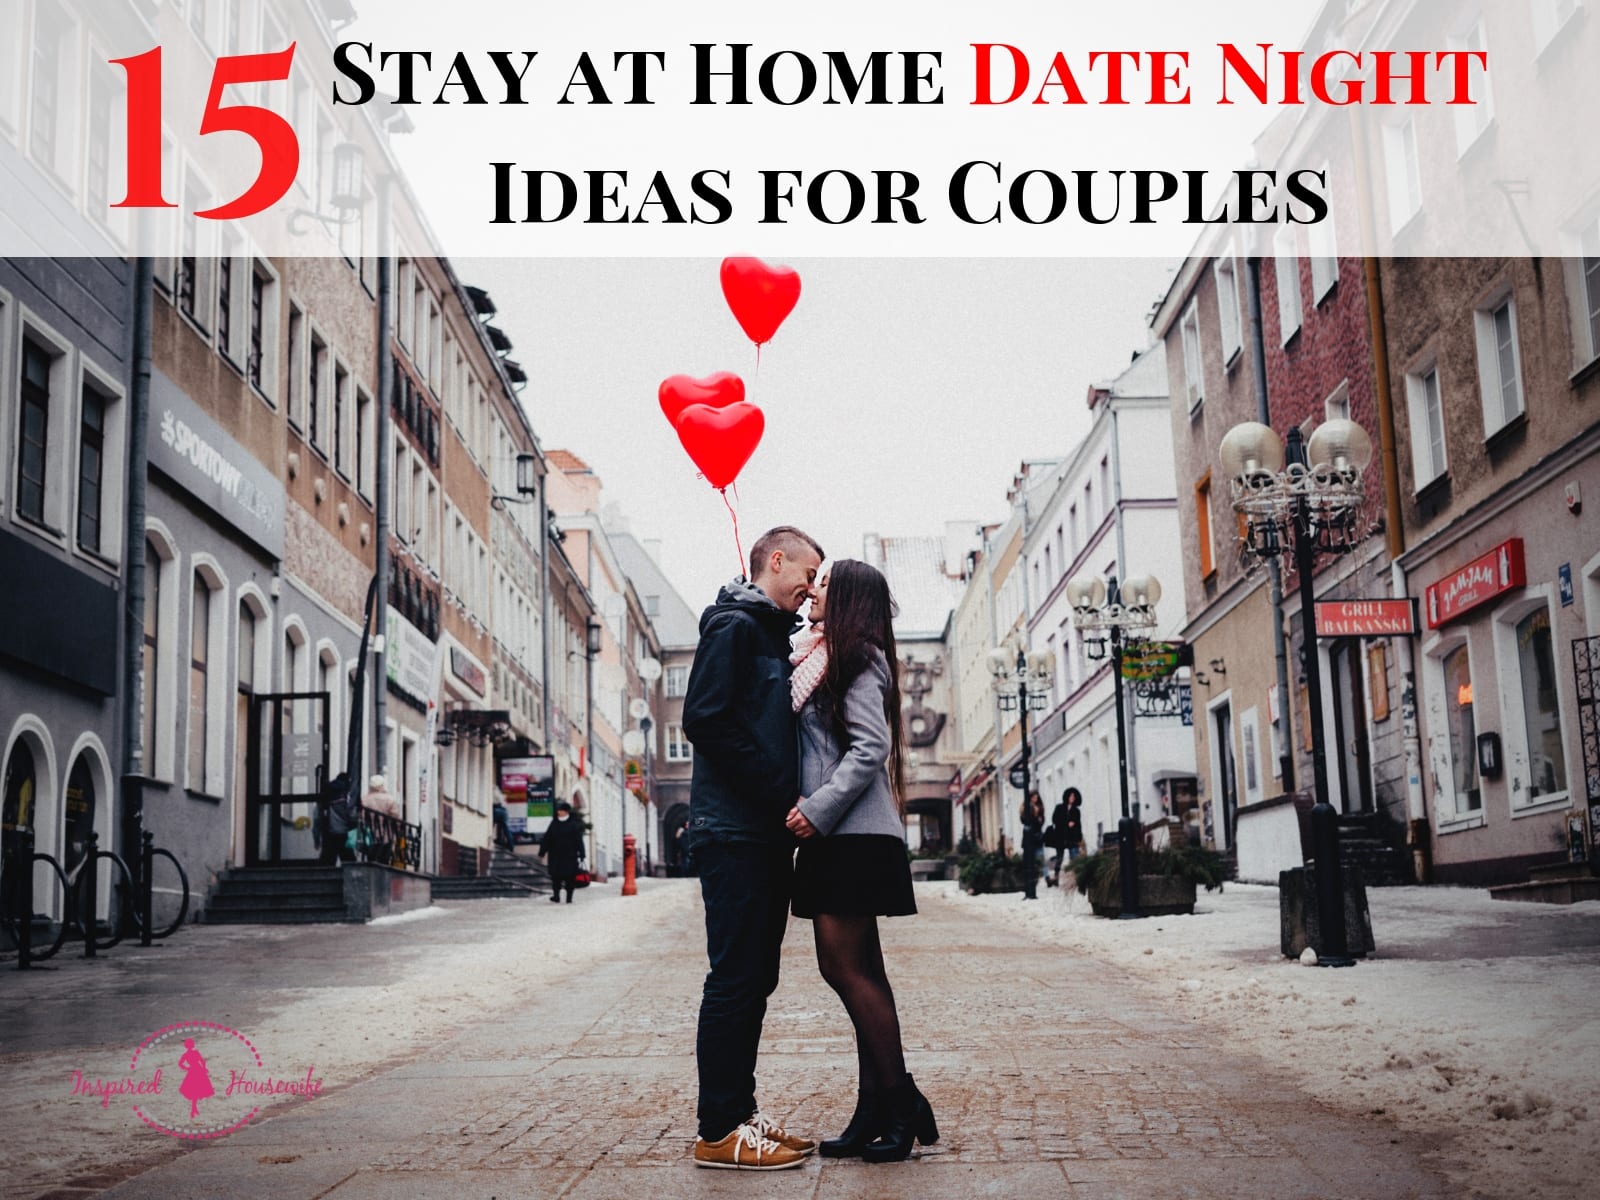 15 Stay at Home Date Night Ideas for Couples